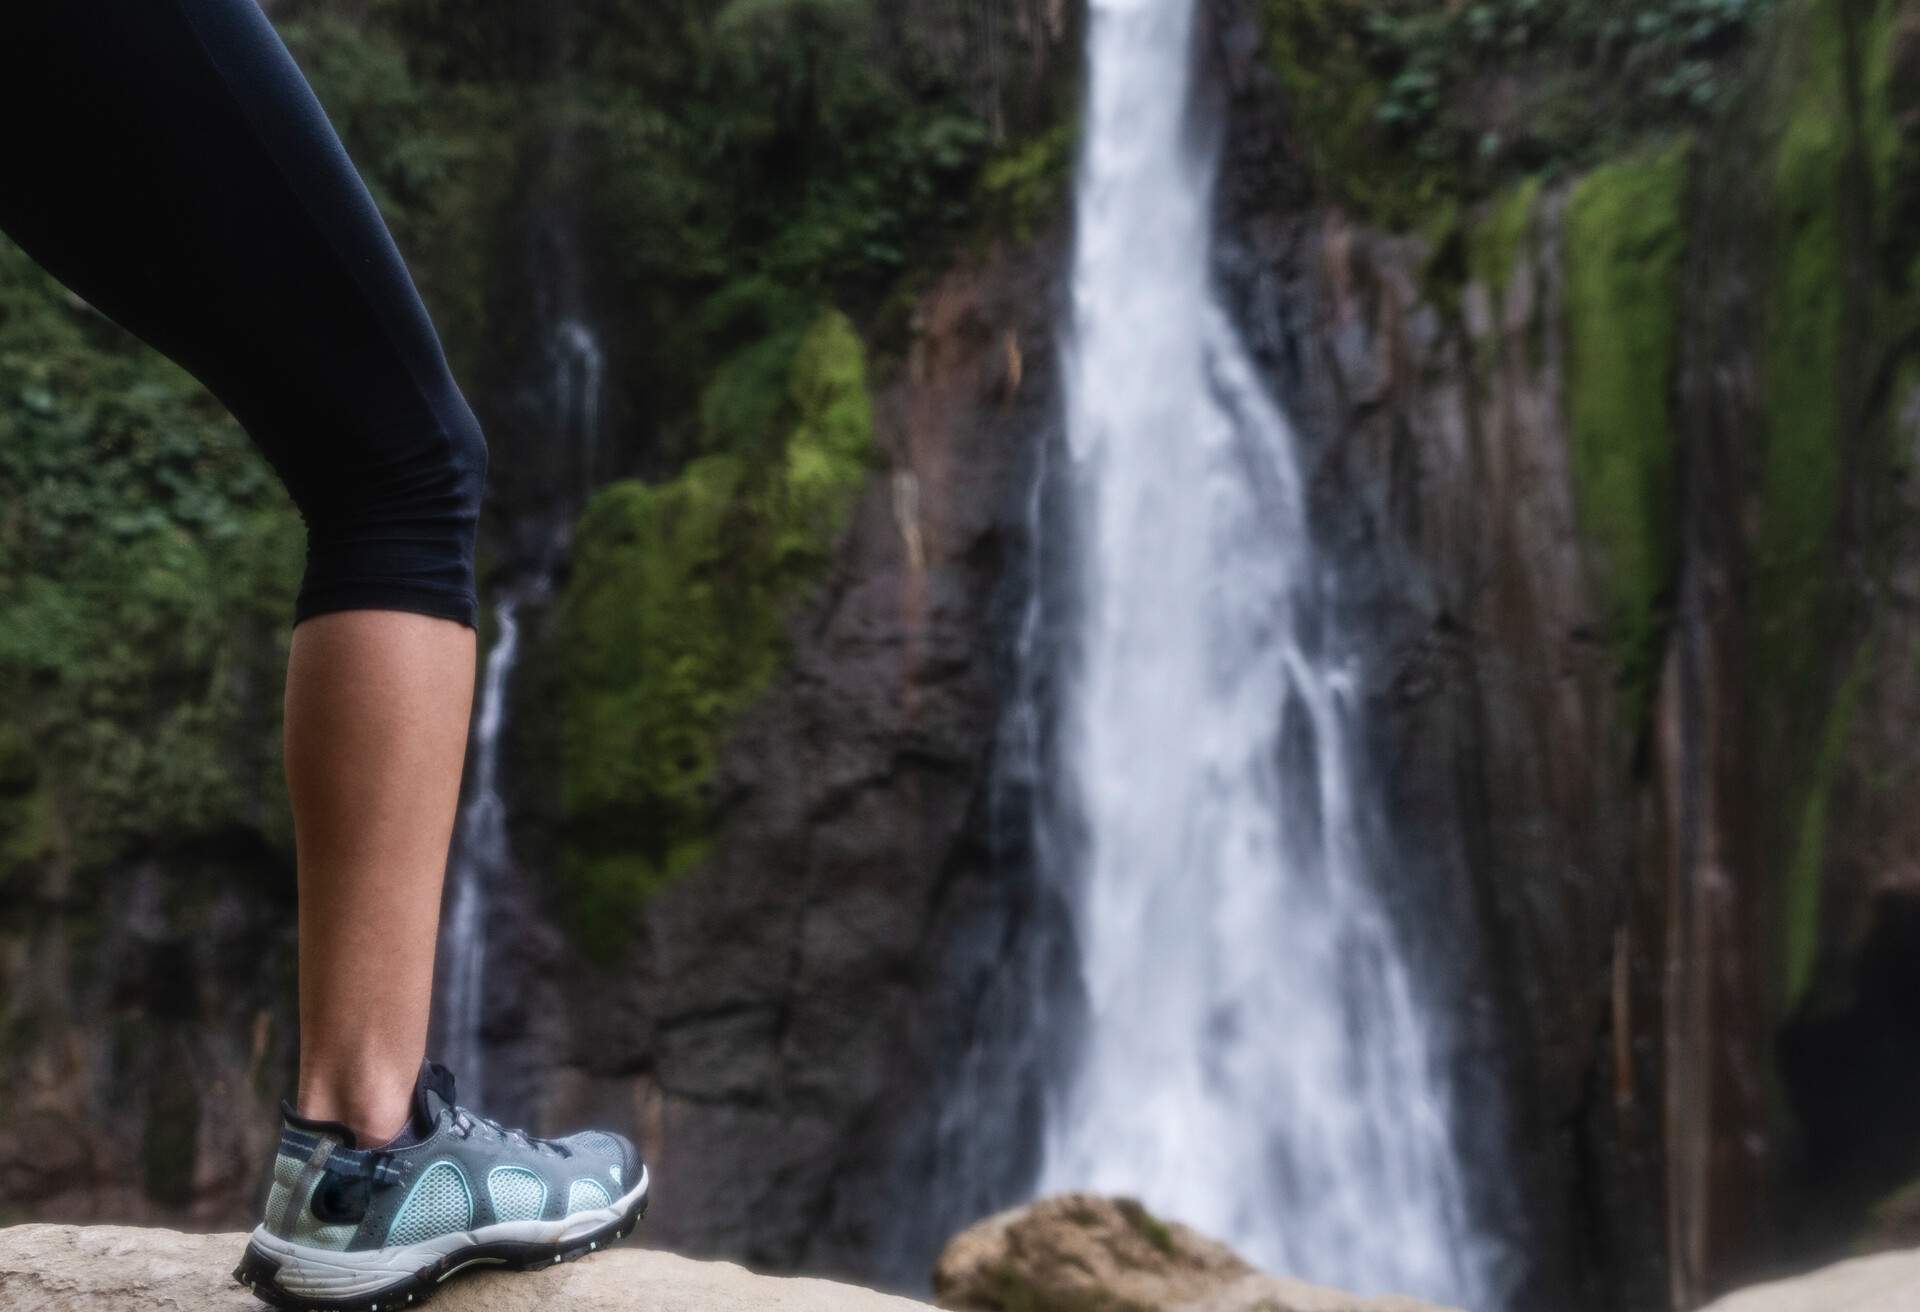 Selective focus on the leg of a woman standing in front of a wild waterfall